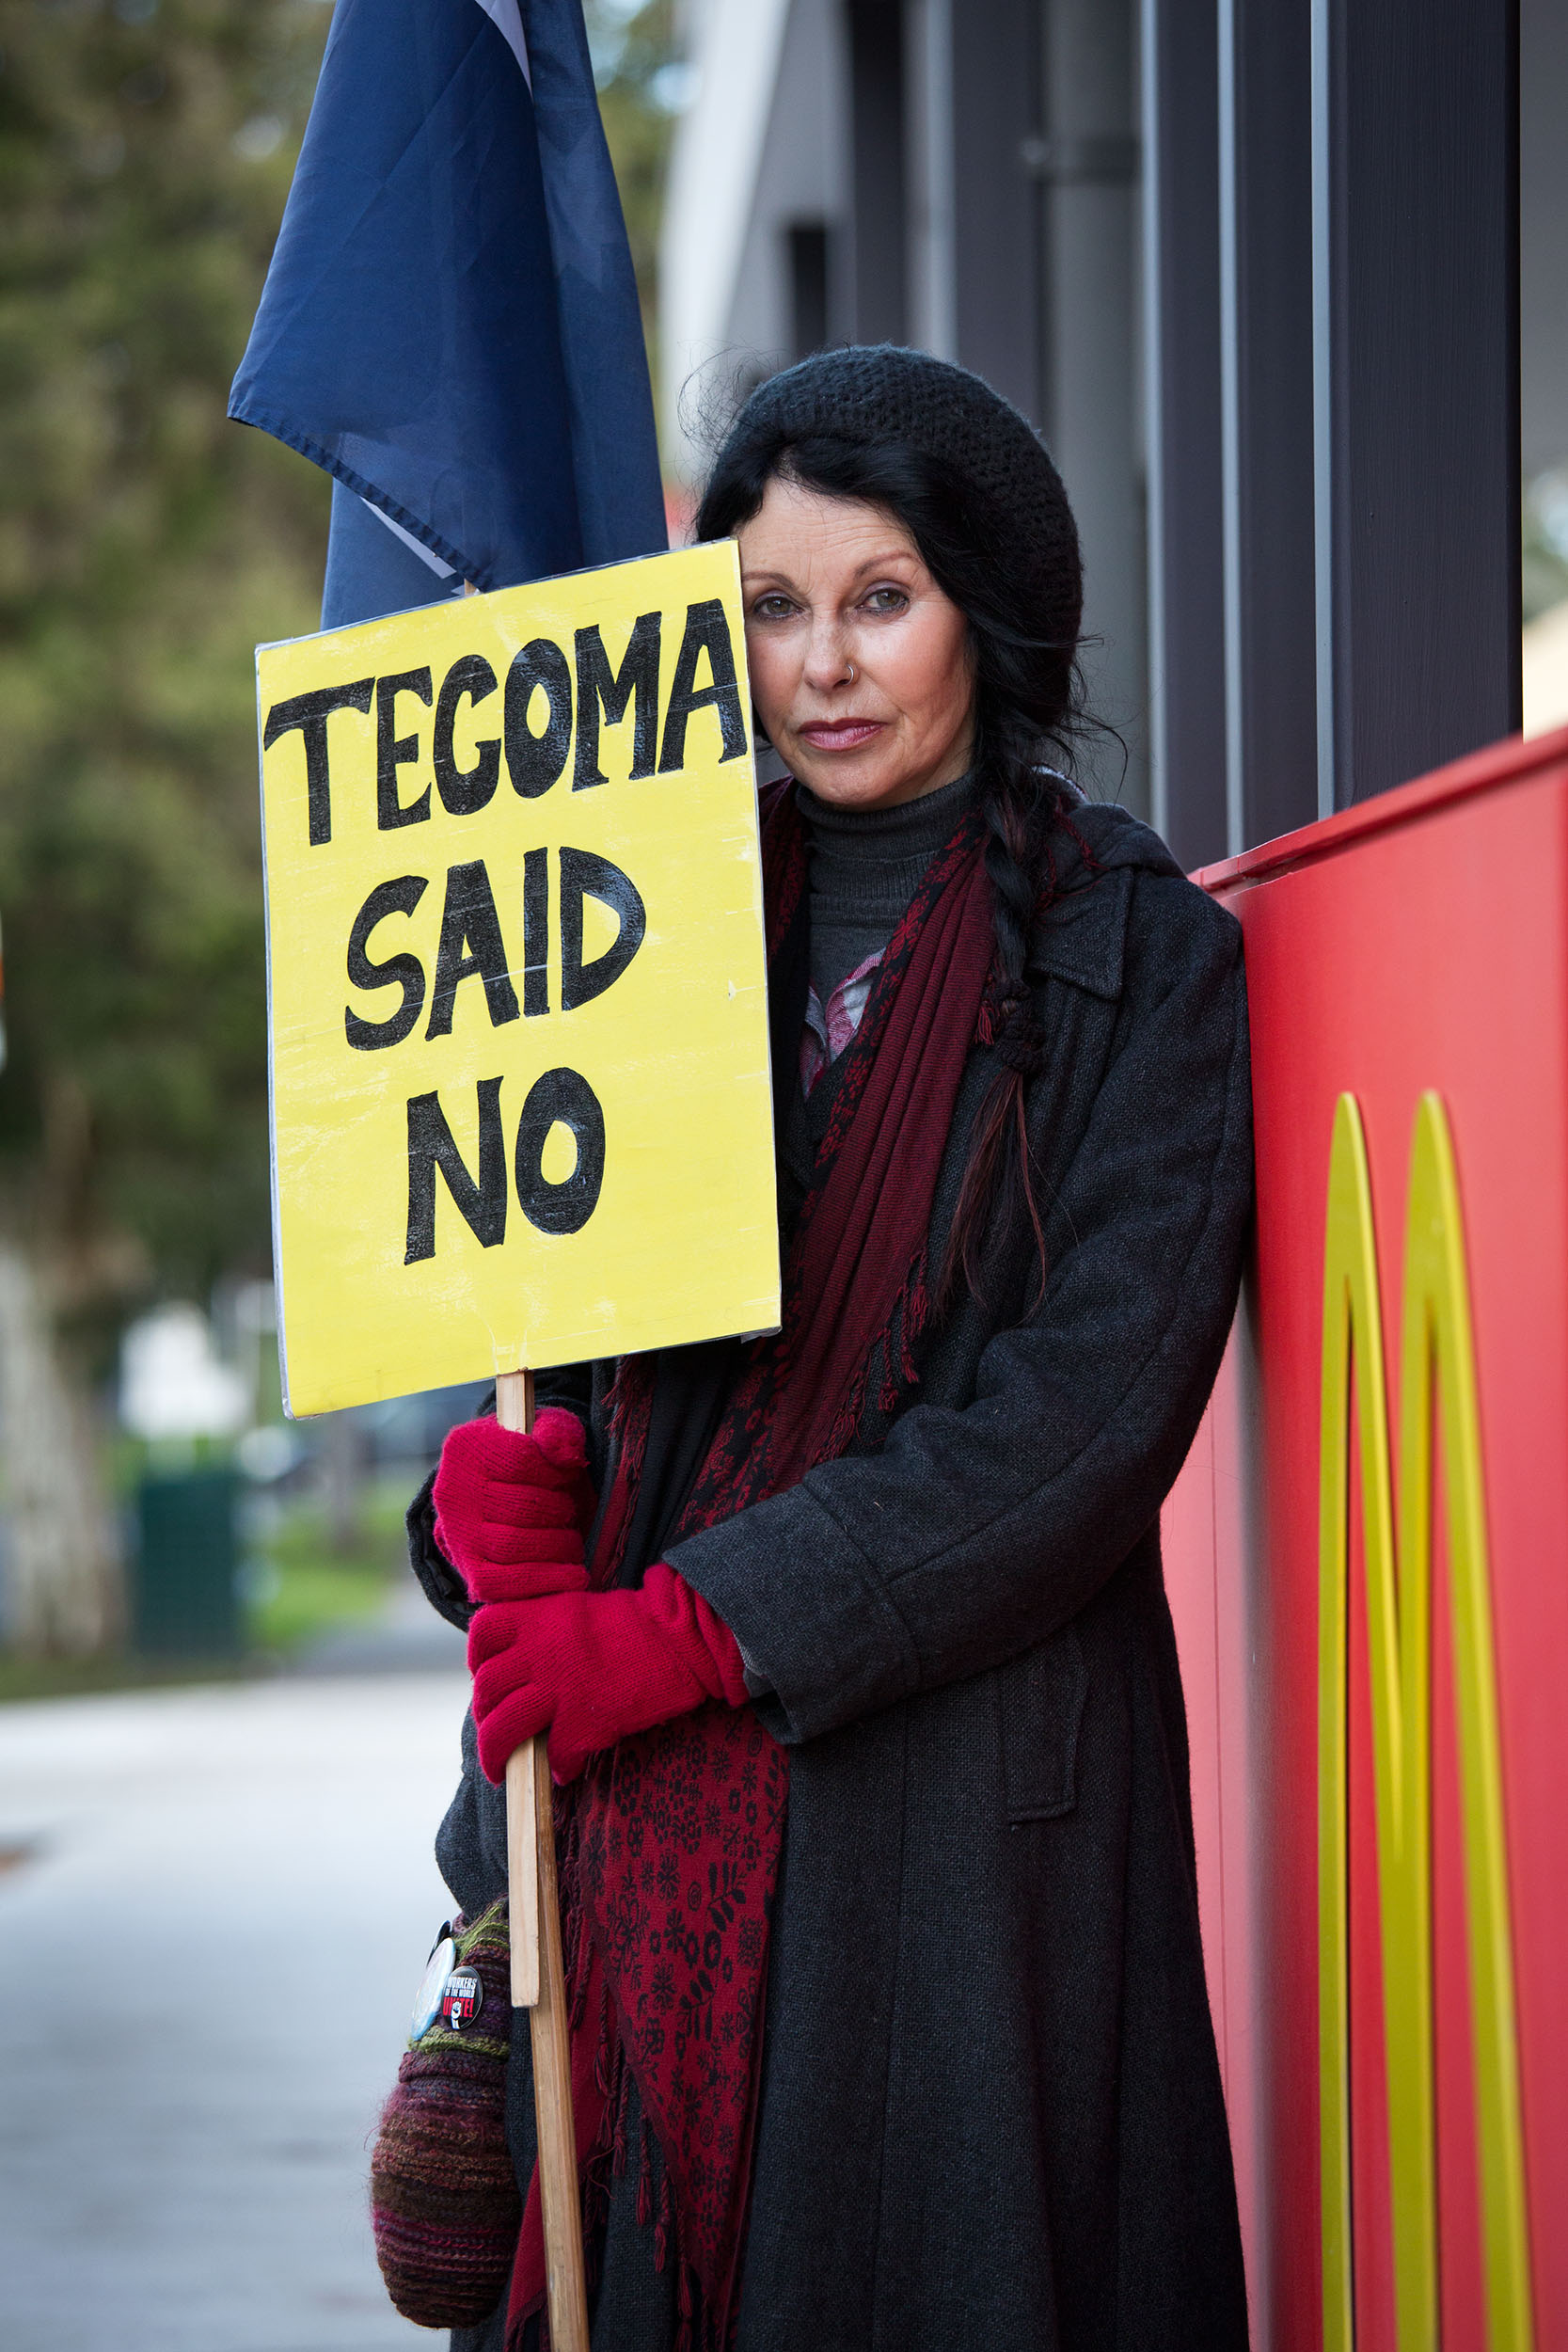  Week 29: Marcia, Tecoma, VIC
Tecoma’s controversial McDonalds is now a reality, but a dedicated group of locals, including Marcia, continue to protest. 